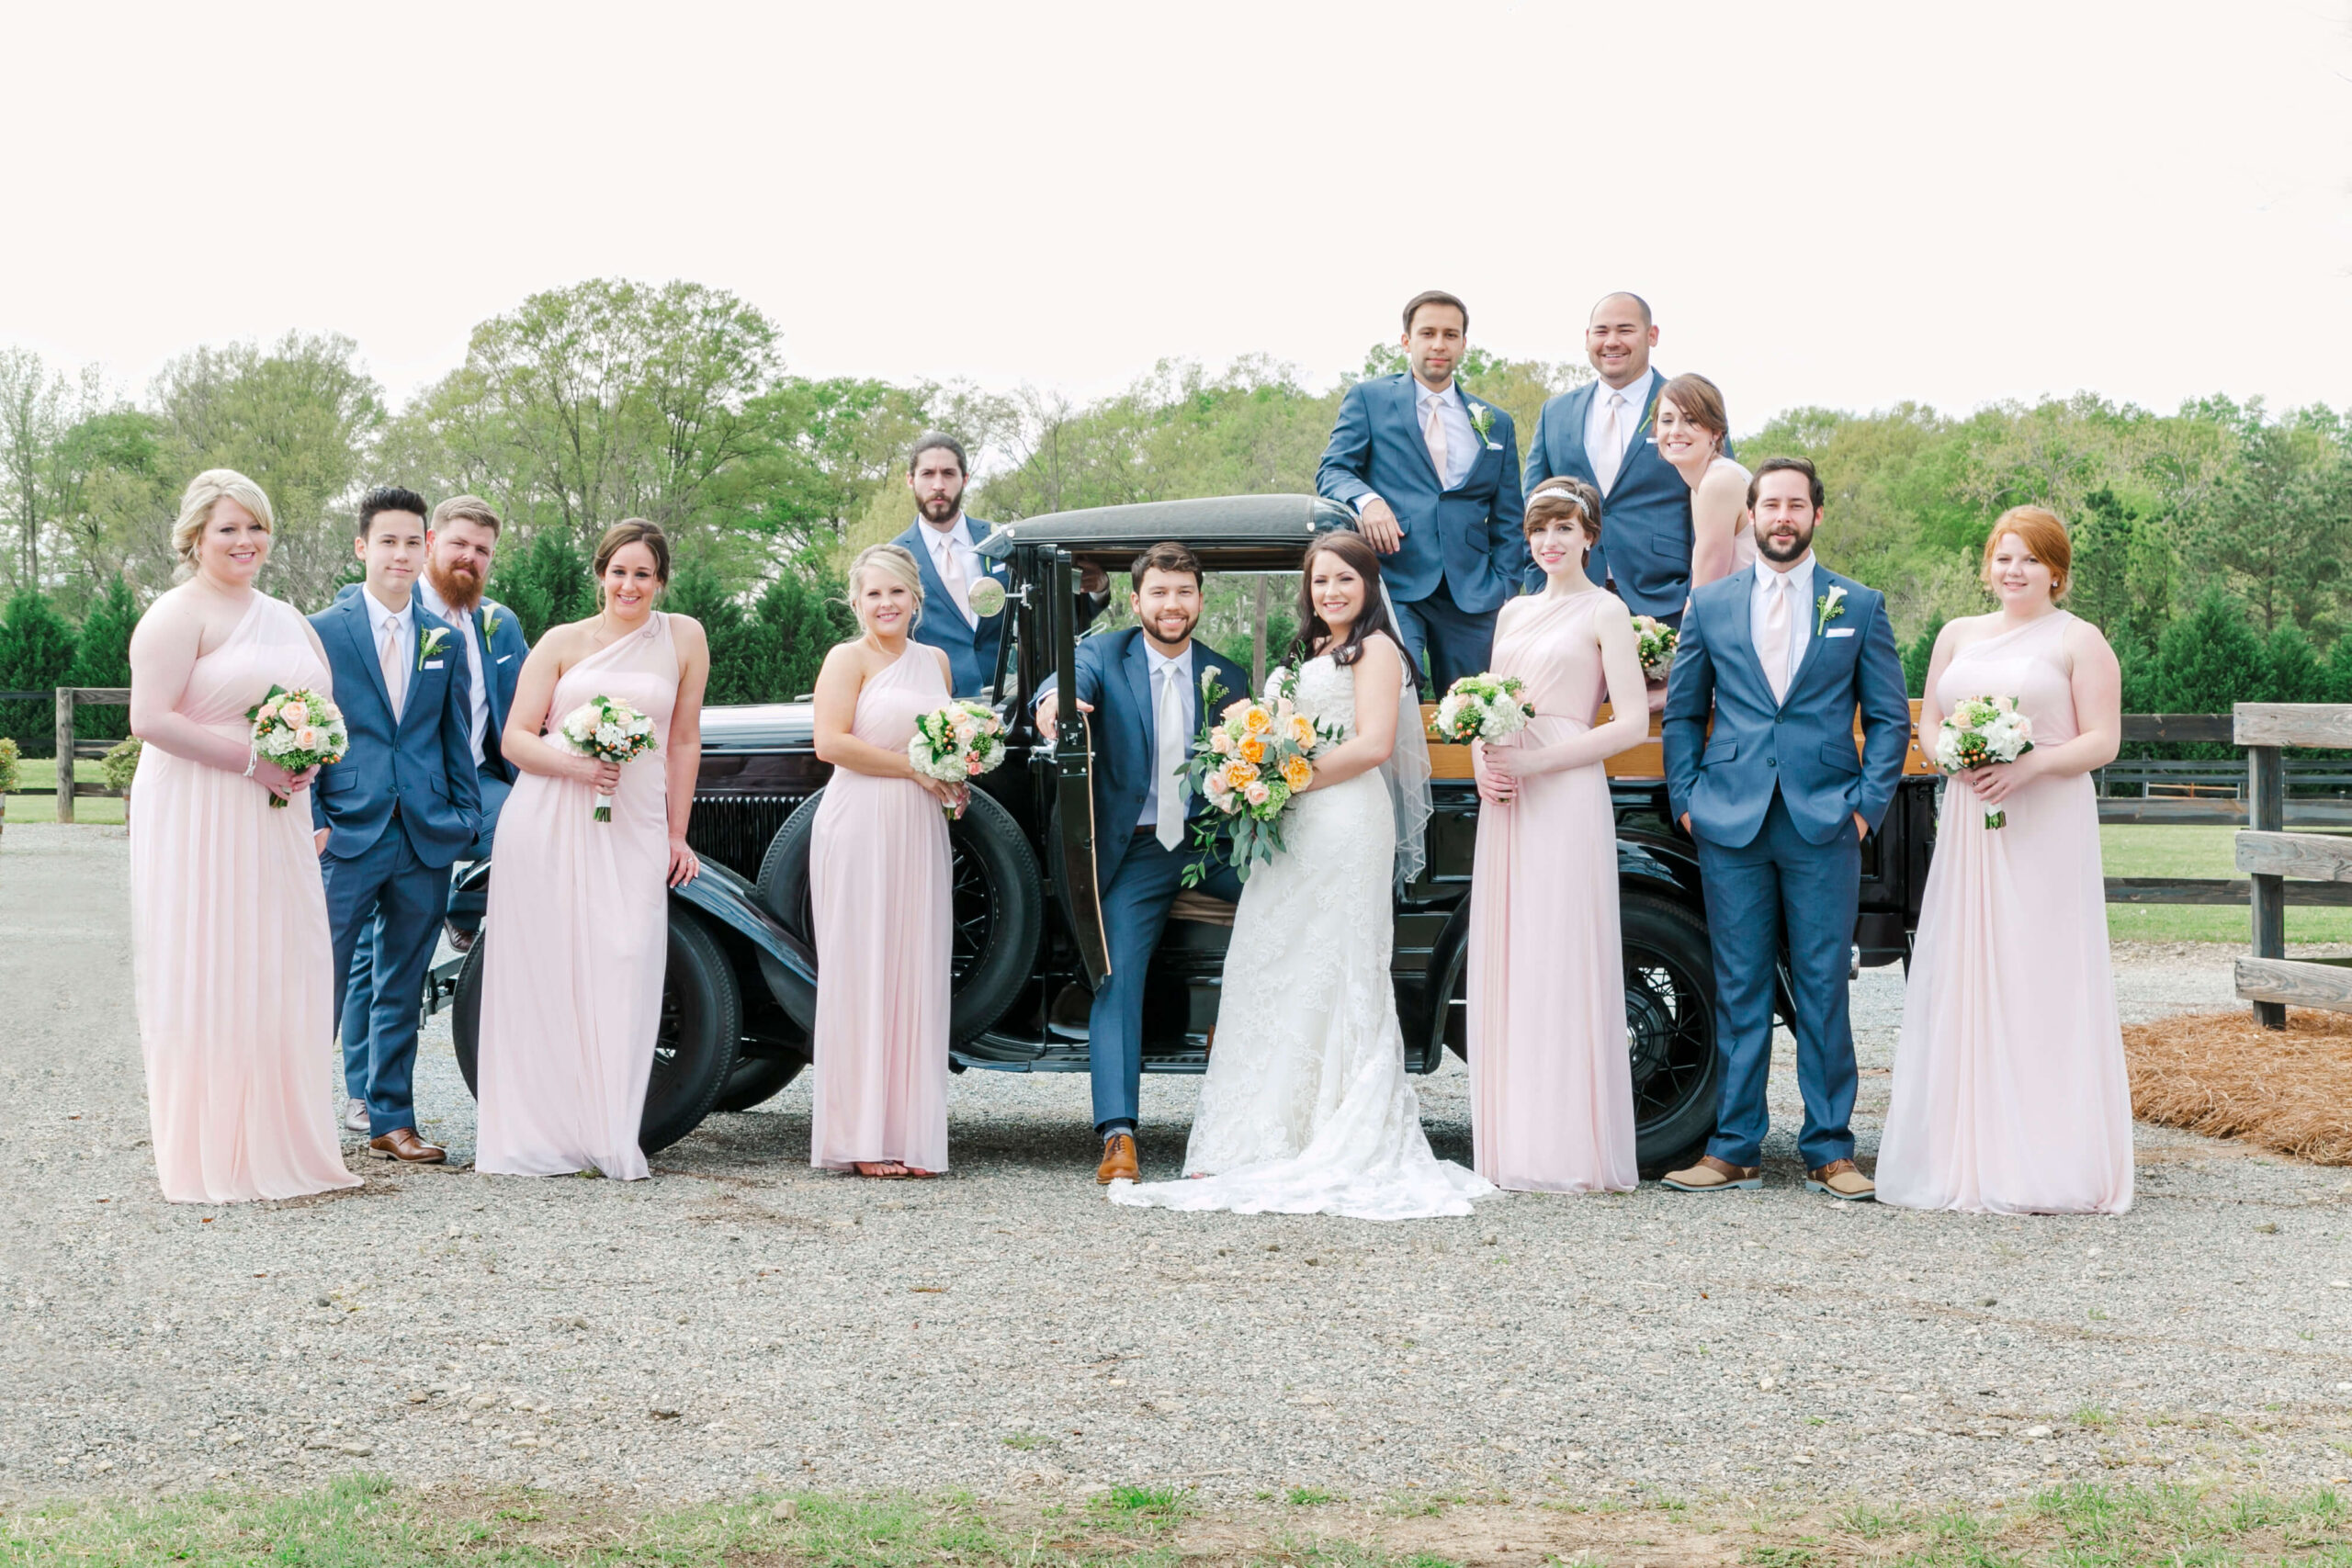 Bridal party poses around a vintage truck.